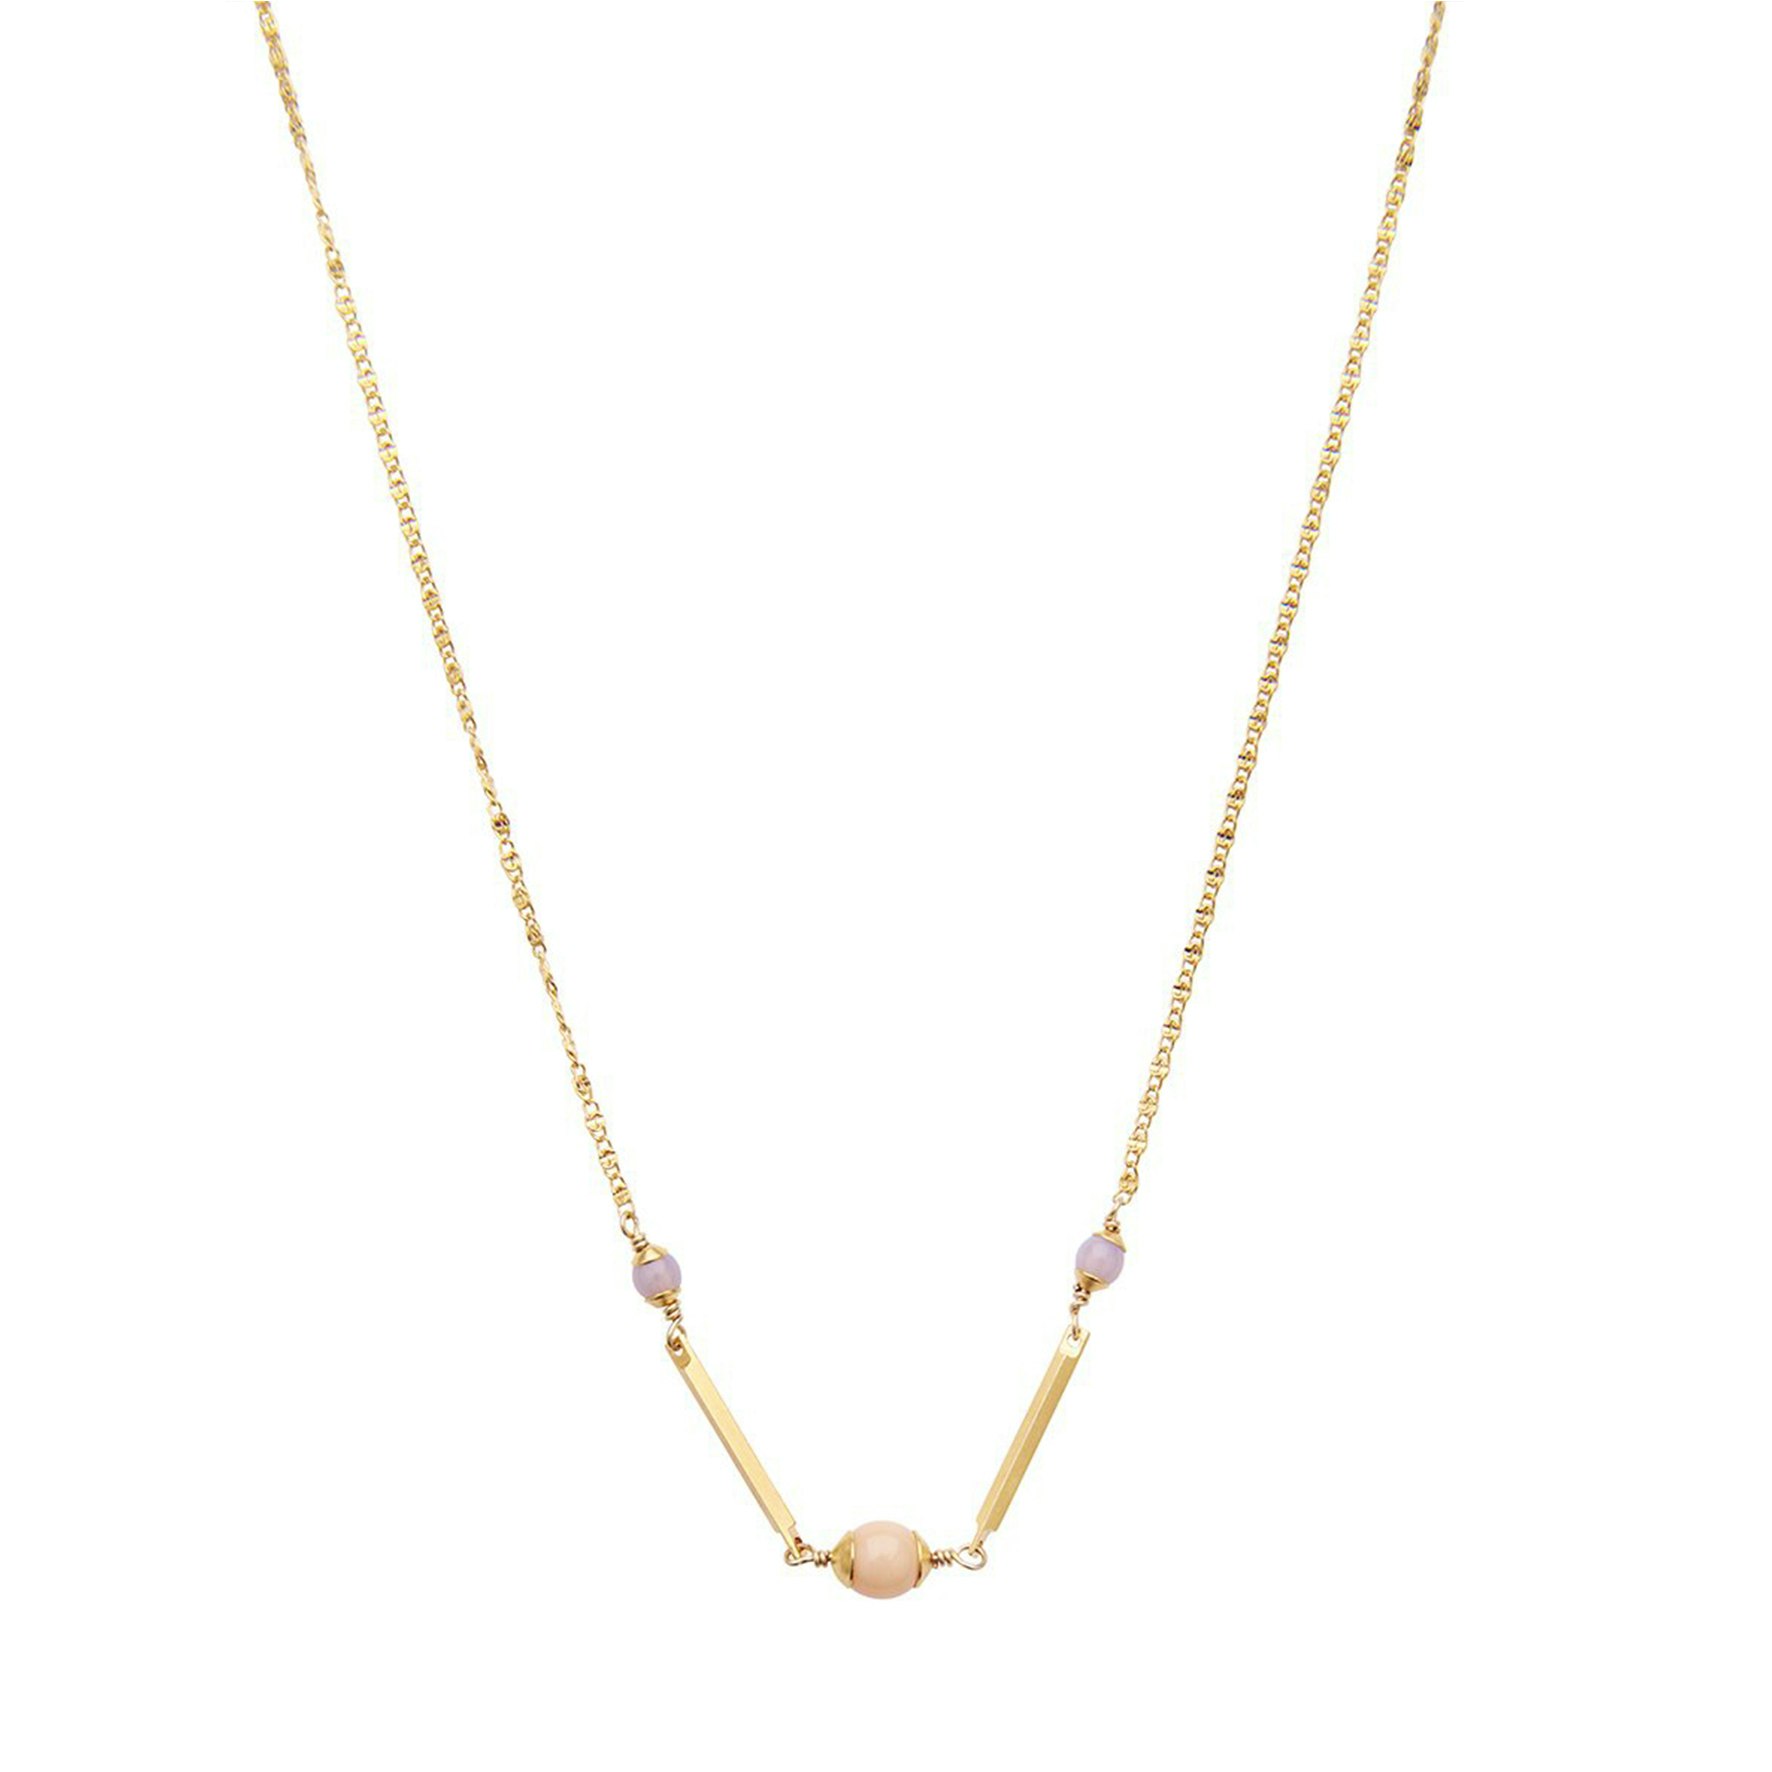 Polly Necklace from Pico in Goldplated Brass